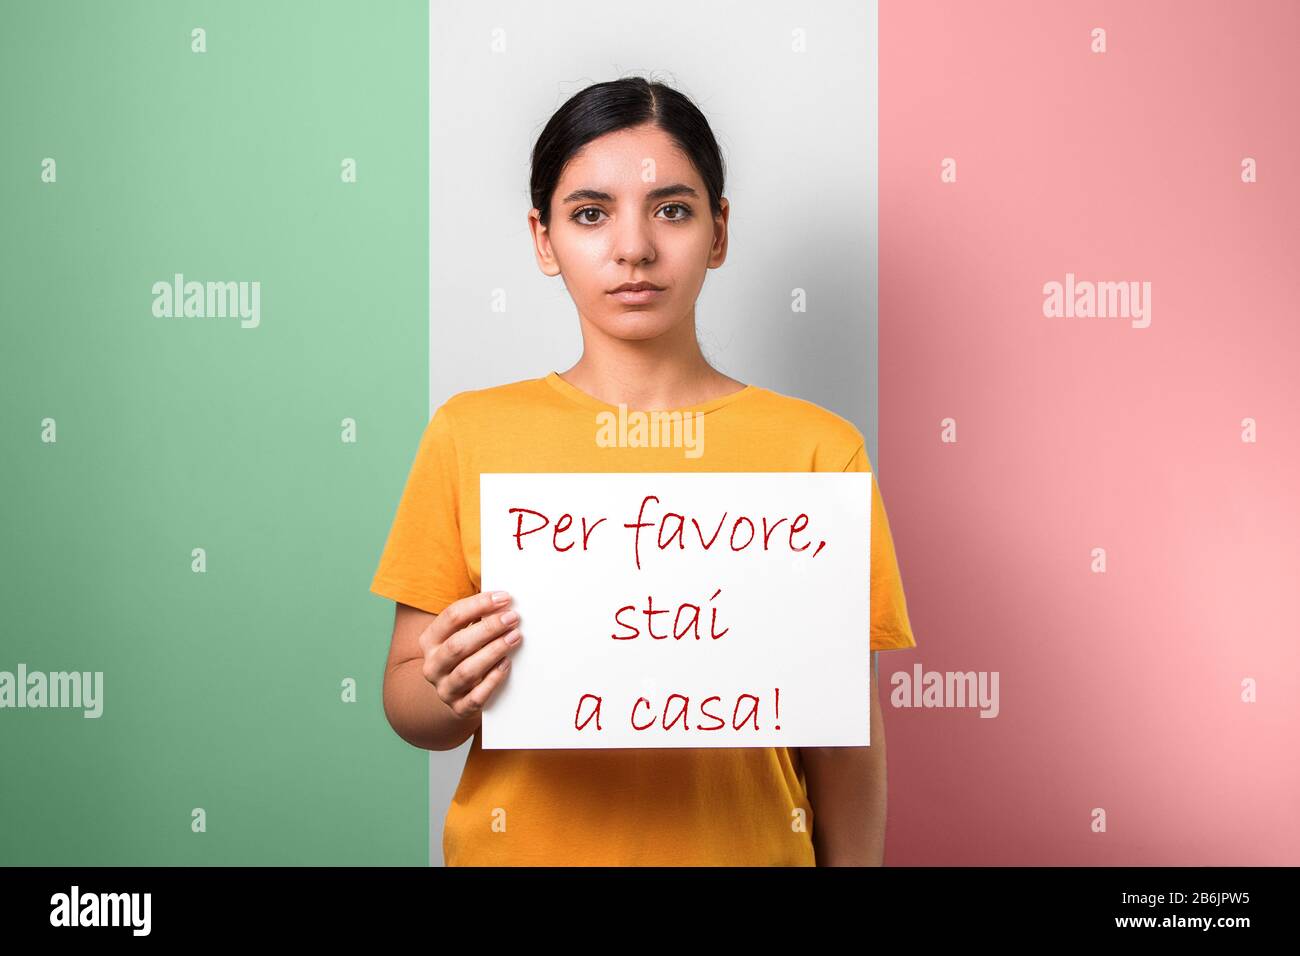 coronavirus advice to stay at home. woman holding a placard against italian flag asking people not to leave their houses Stock Photo